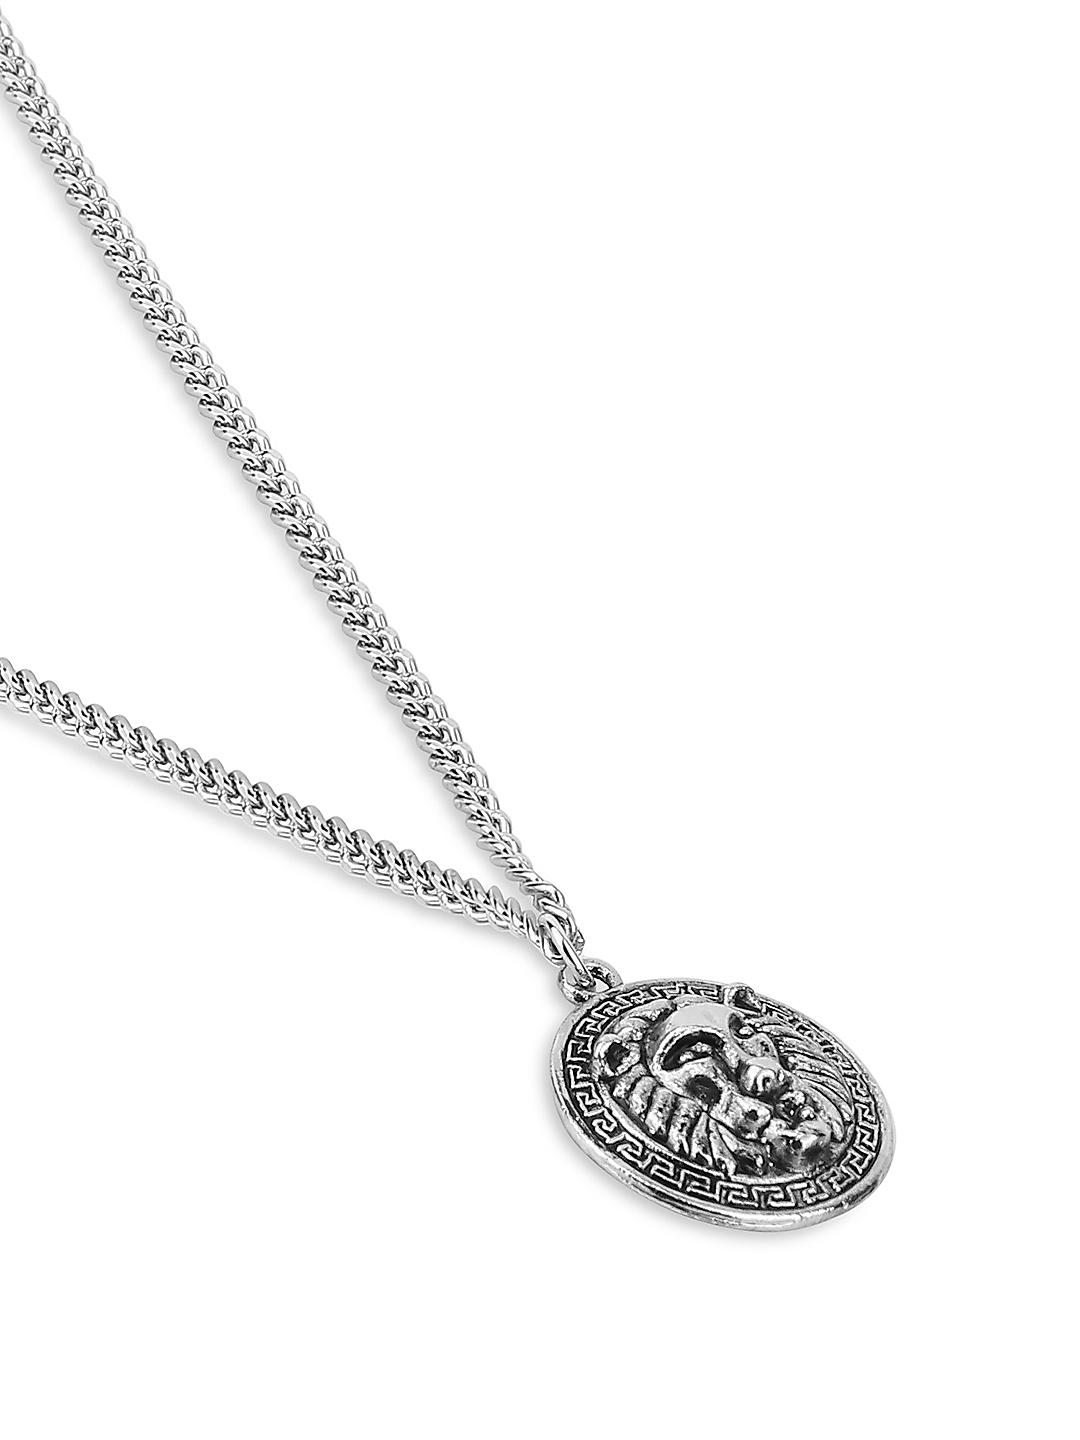 925 pure silver LION FACE pendant best gifting pendant, wheat chain necklace  locket best gifting jewelry NSP729/ps51 | TRIBAL ORNAMENTS